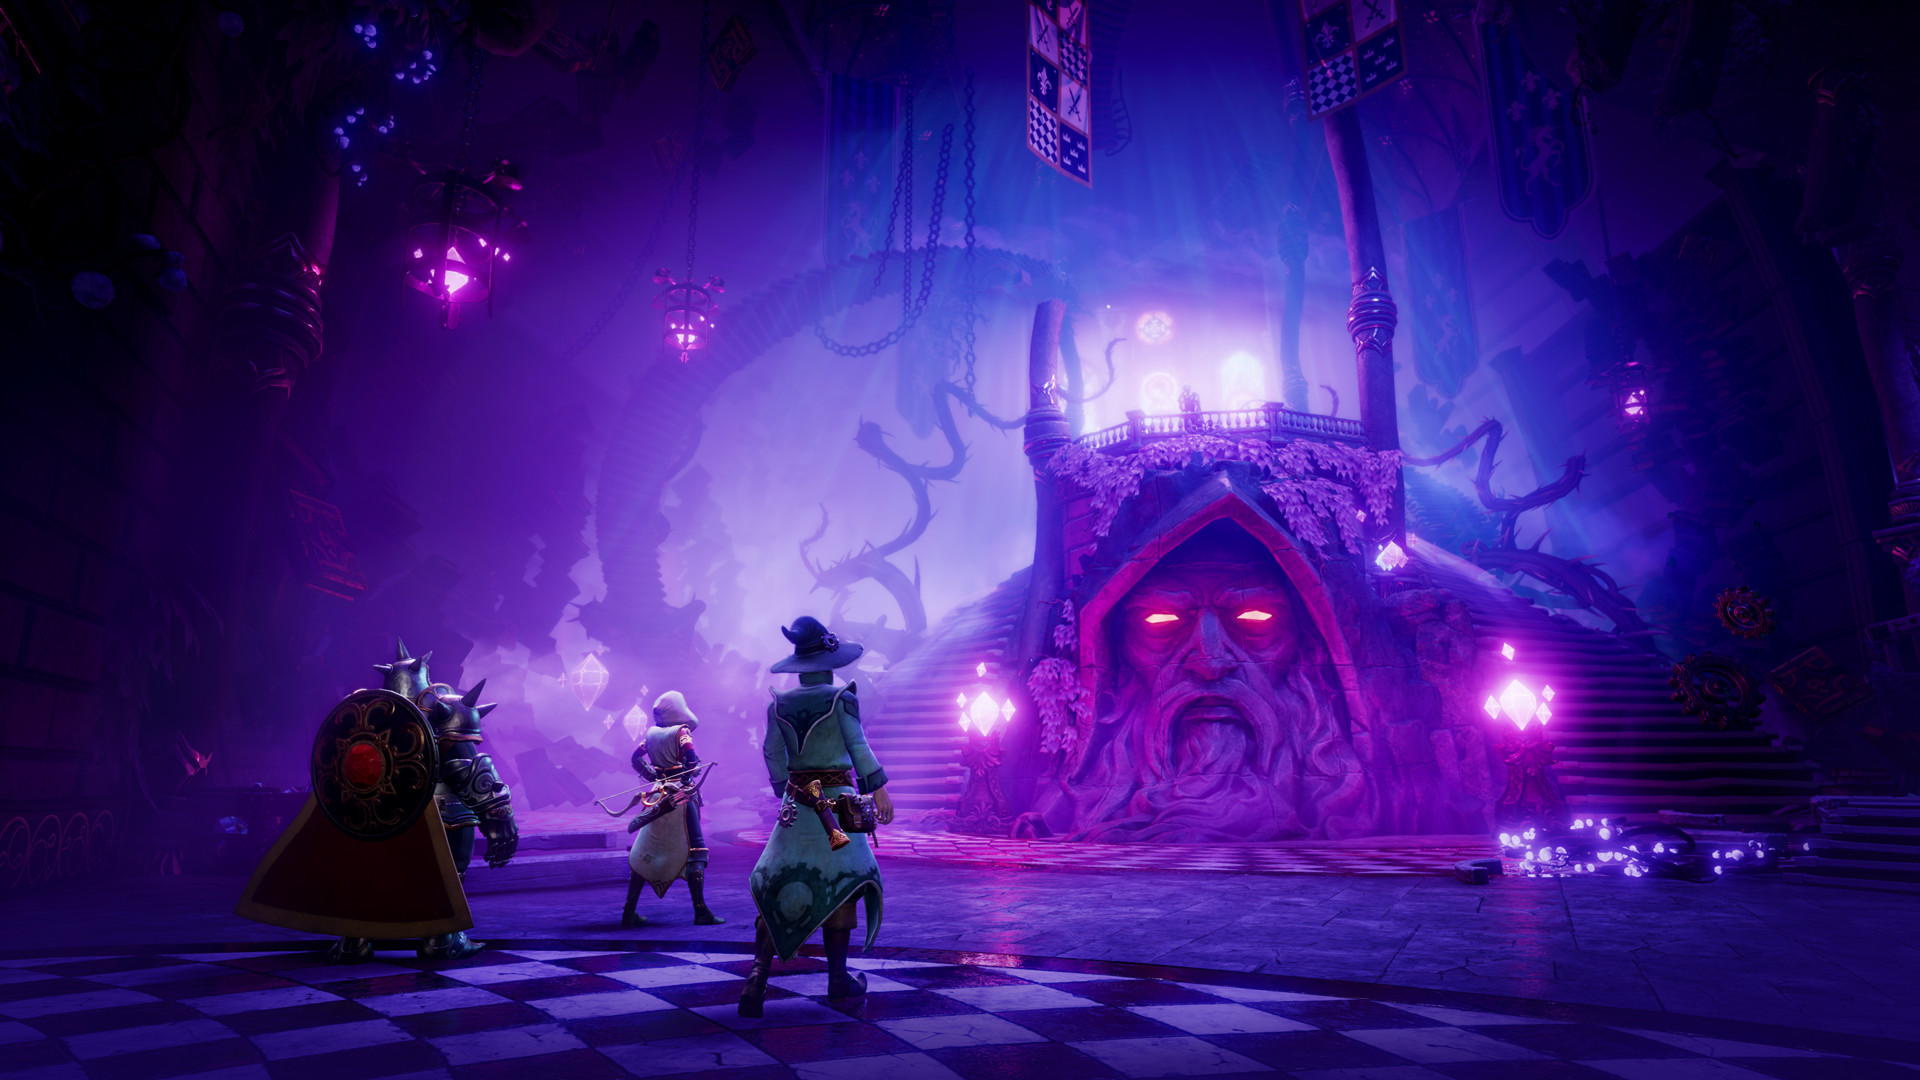 Story Trailer for Trine 4: The Nightmare Prince